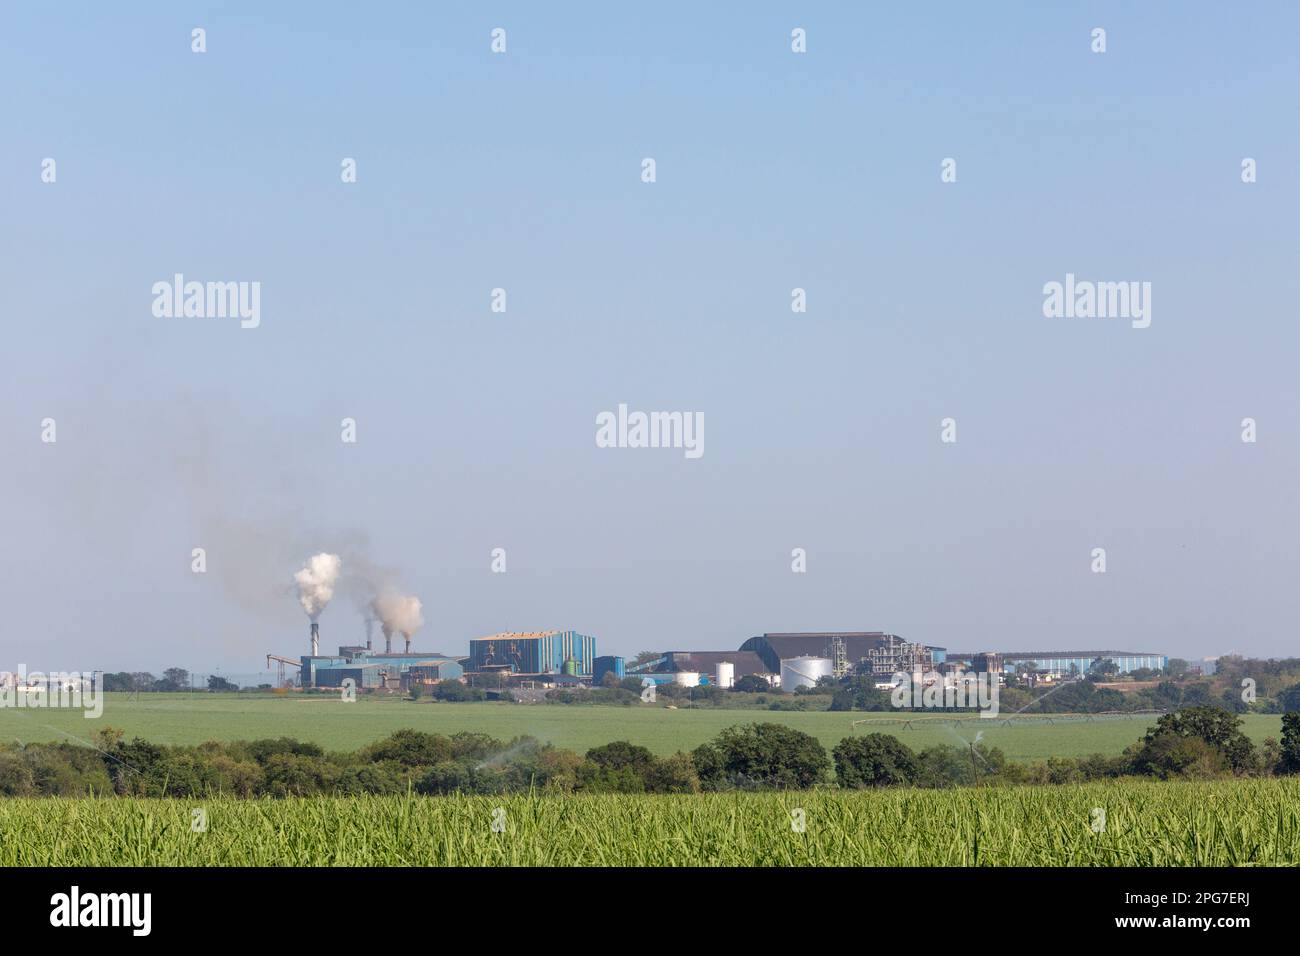 Simunye sugar mill viewed accross irrigated sugar cane fields in the foreground in eSwatini Stock Photo